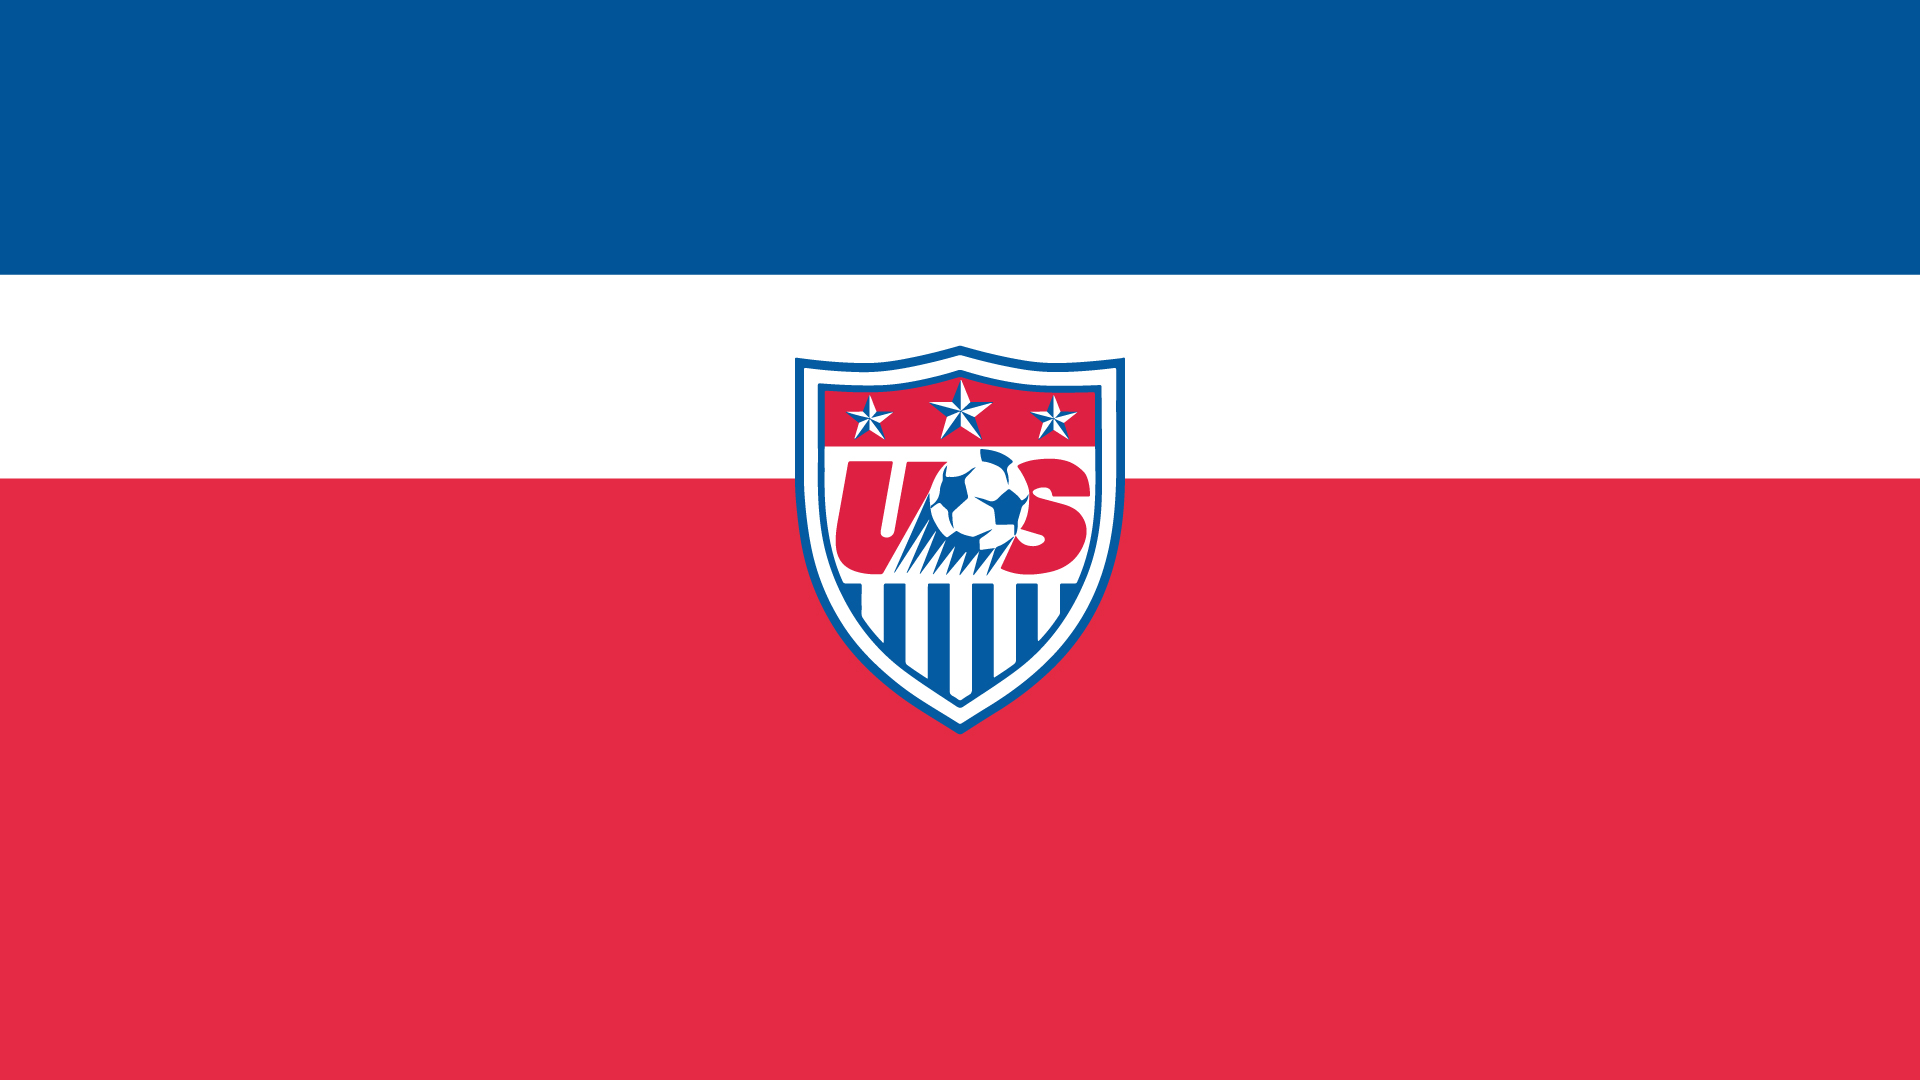 USA Nation Soccer Team HD Wallpaper Background Image 1920x1080